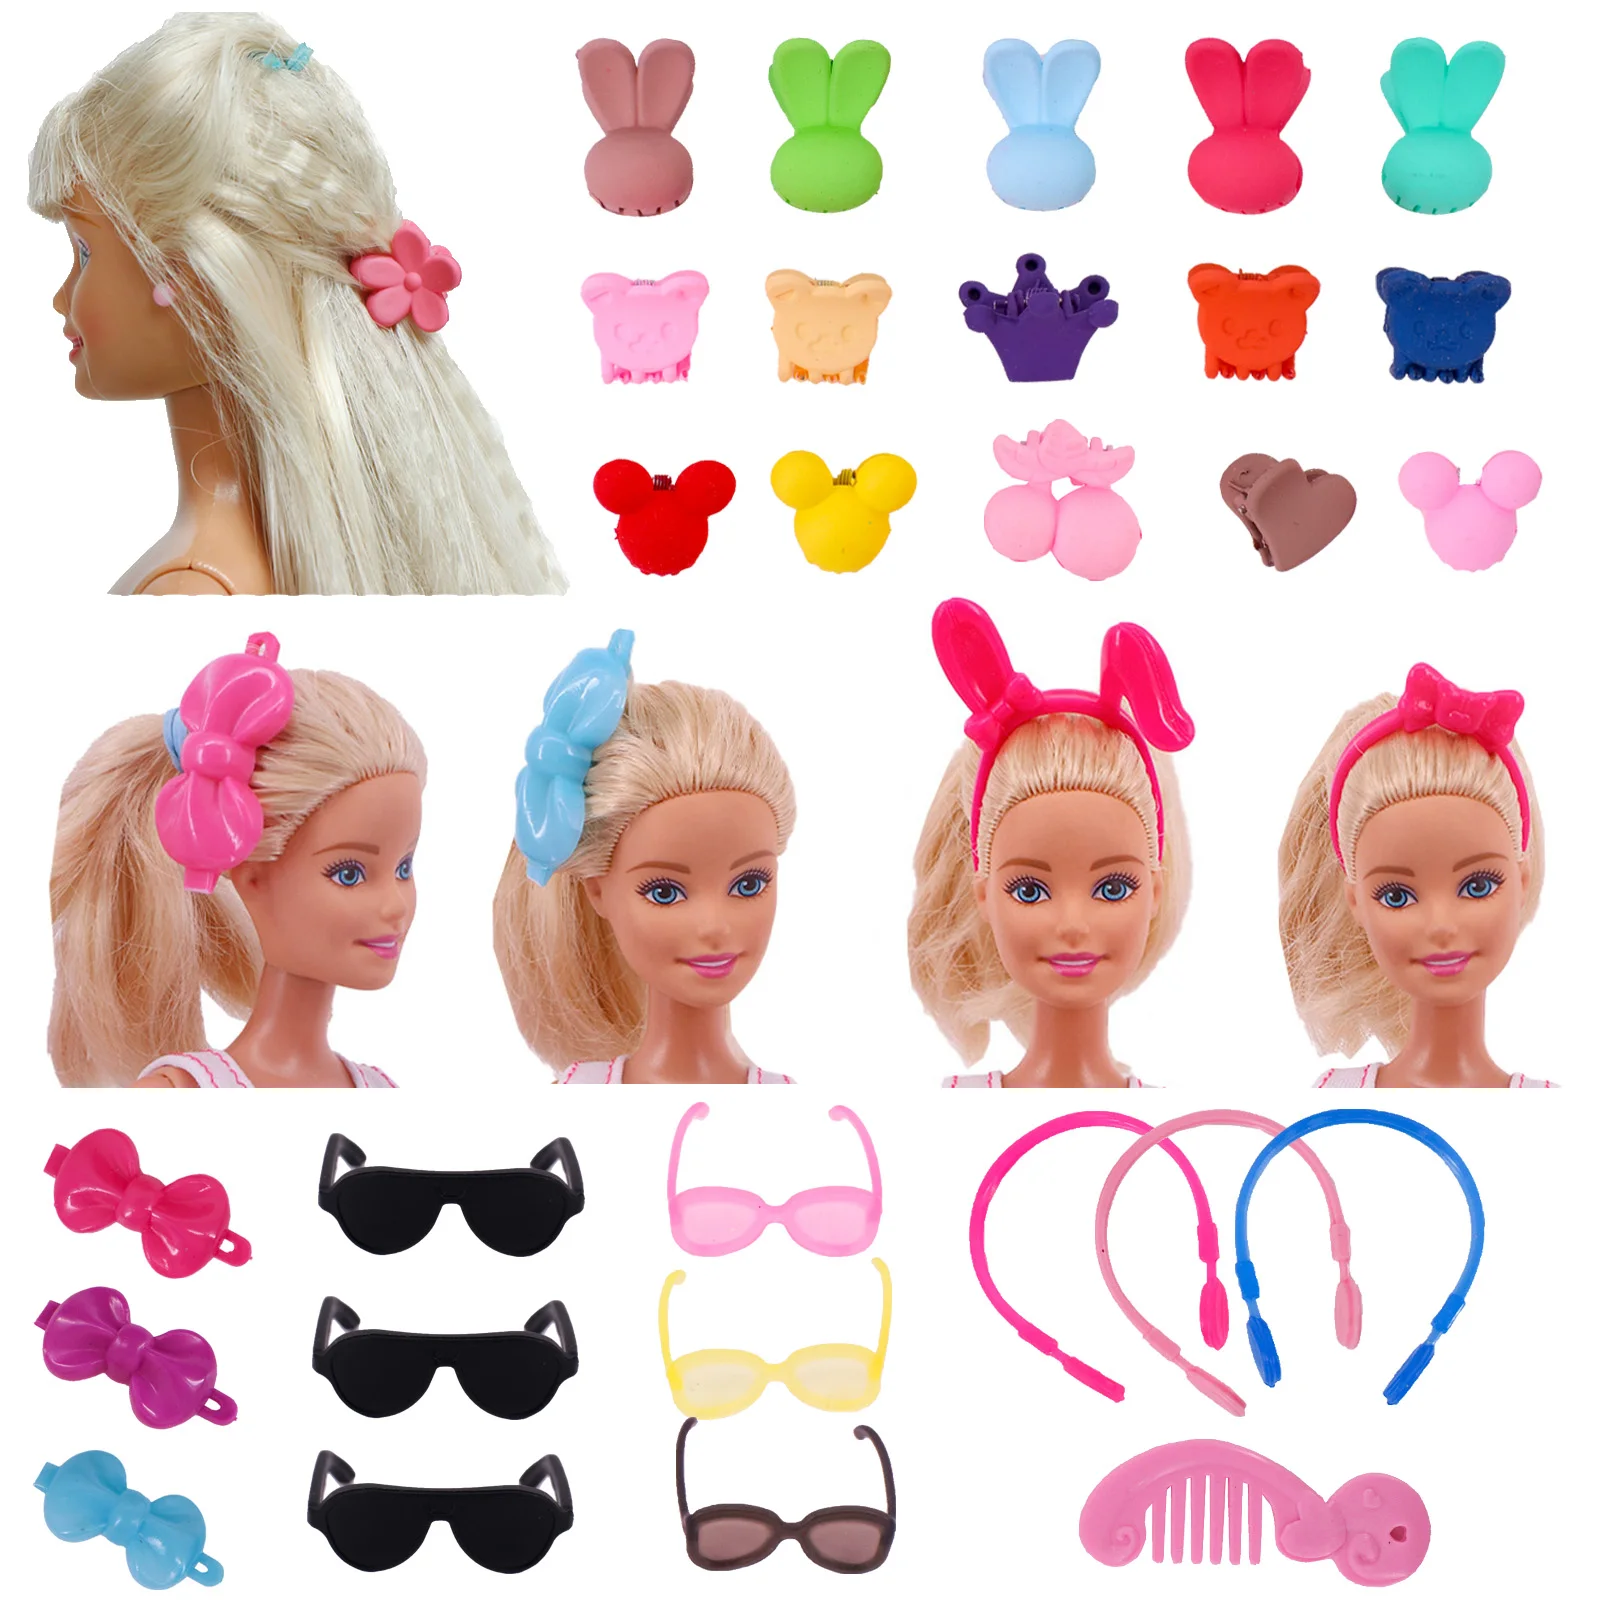 Cute Colorful Flower Small Hair Claws Sweet Hairpins Fashion Clips Glasses Headset for Barbies Doll Hair Accessories Kids Toy